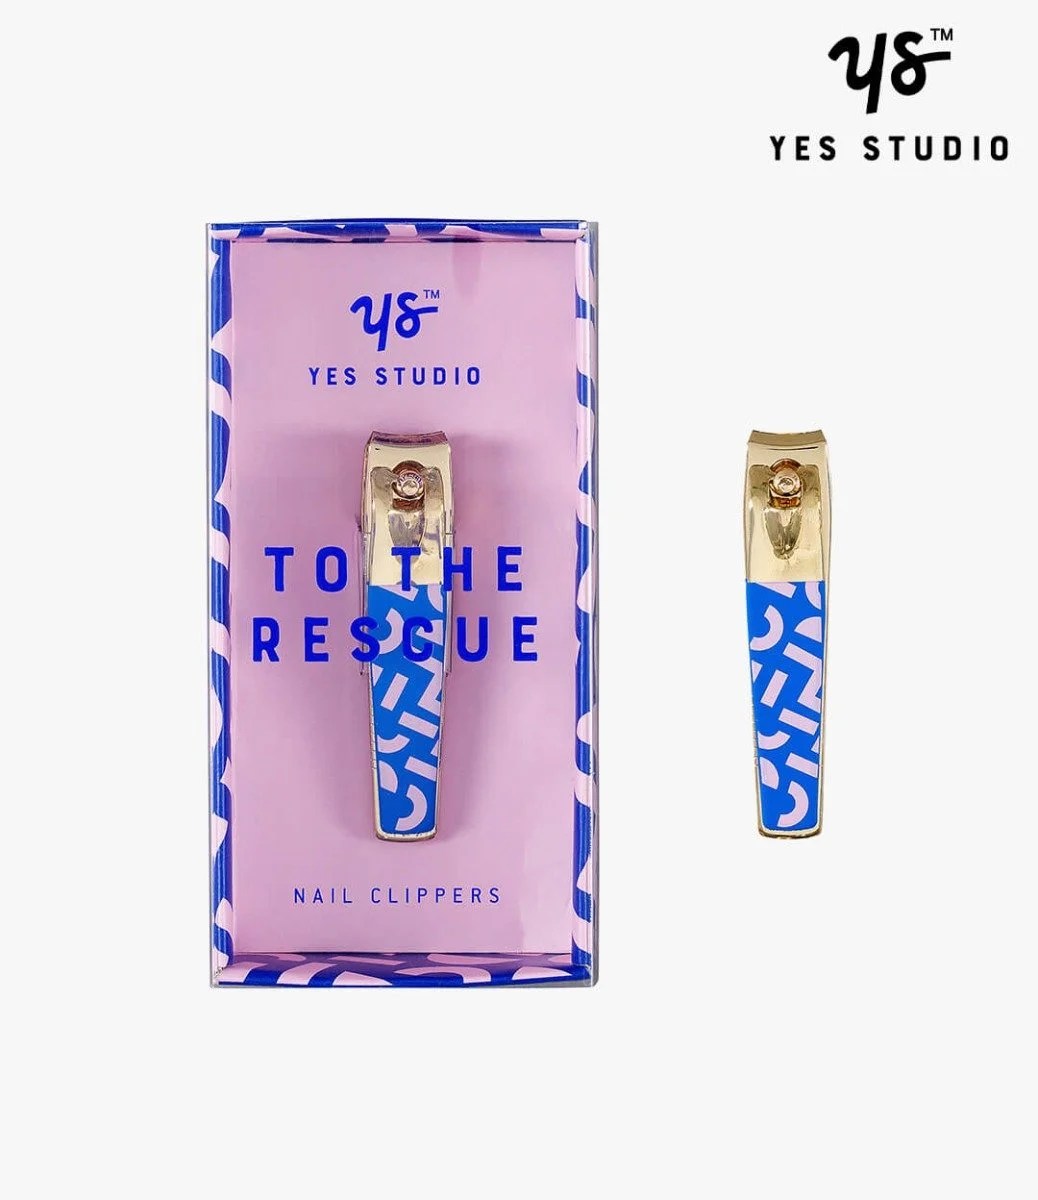 Nail Clipper by Yes Studio